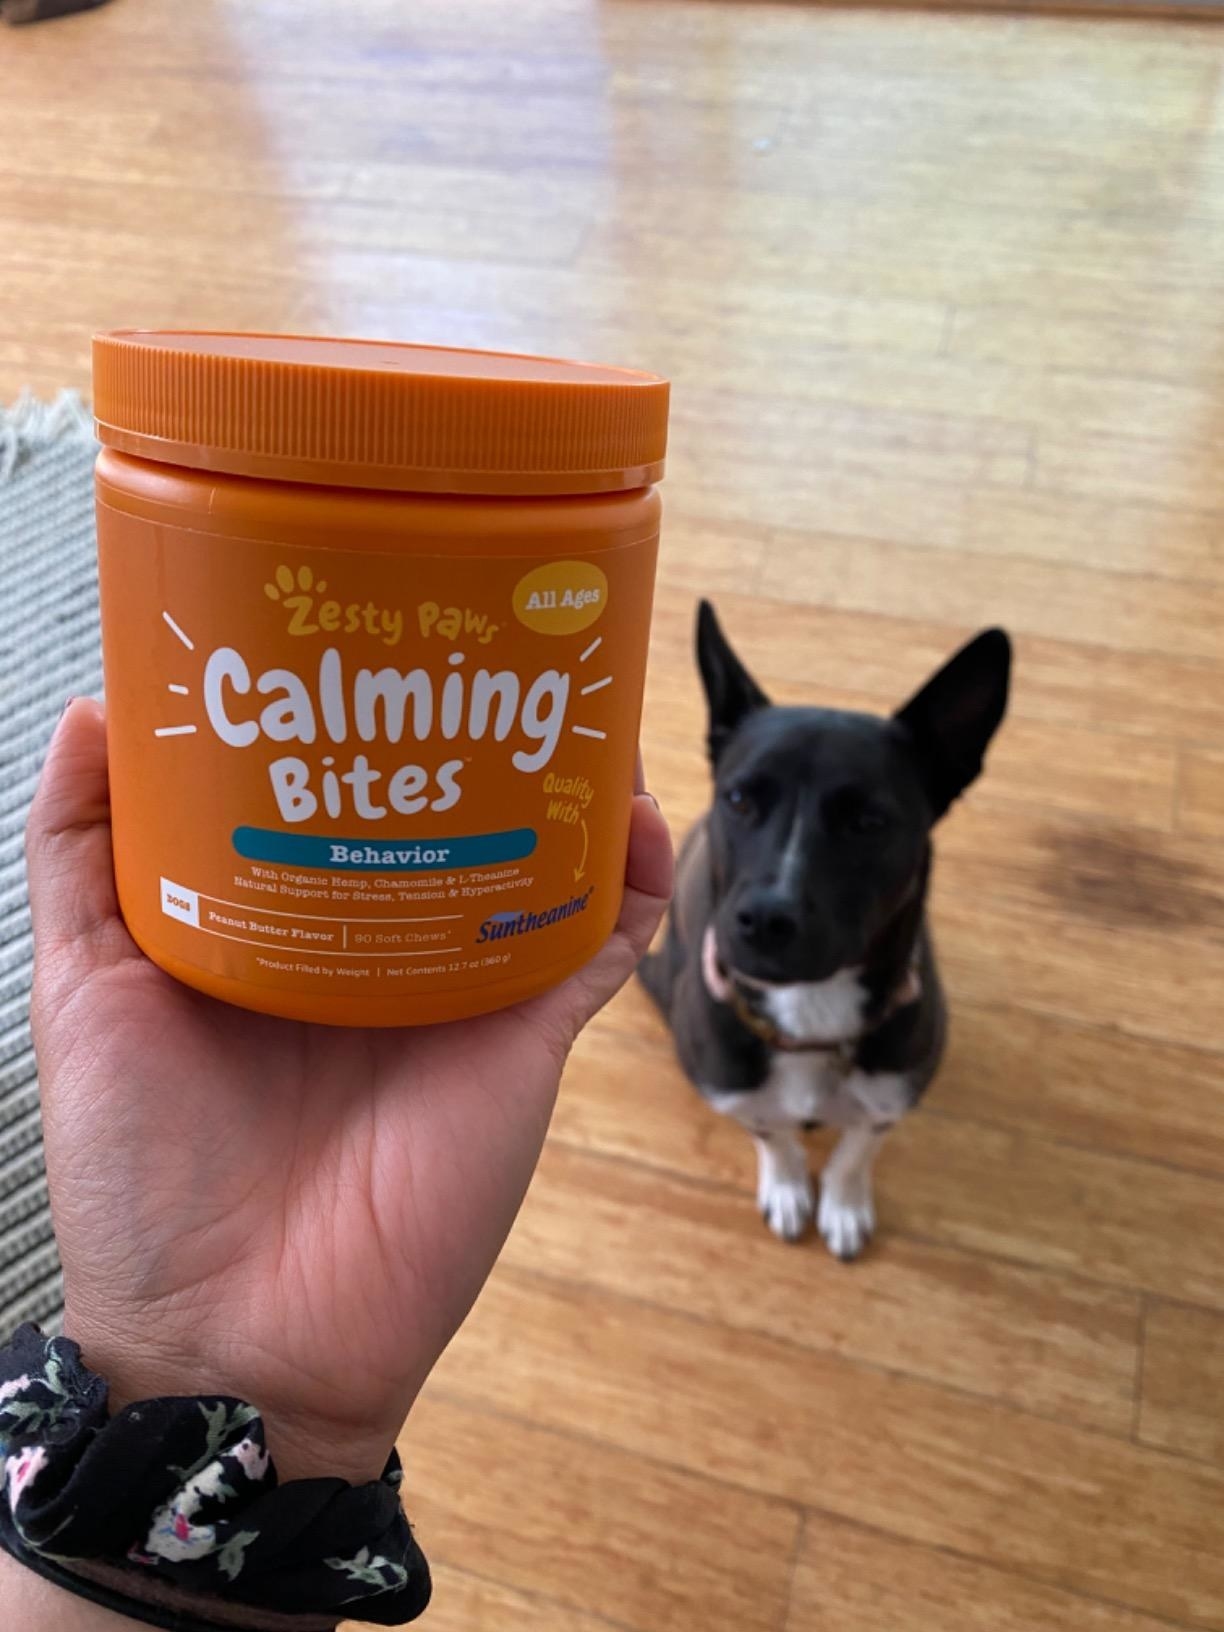 A customer review photo of them holding the orange tub with a dog in the background